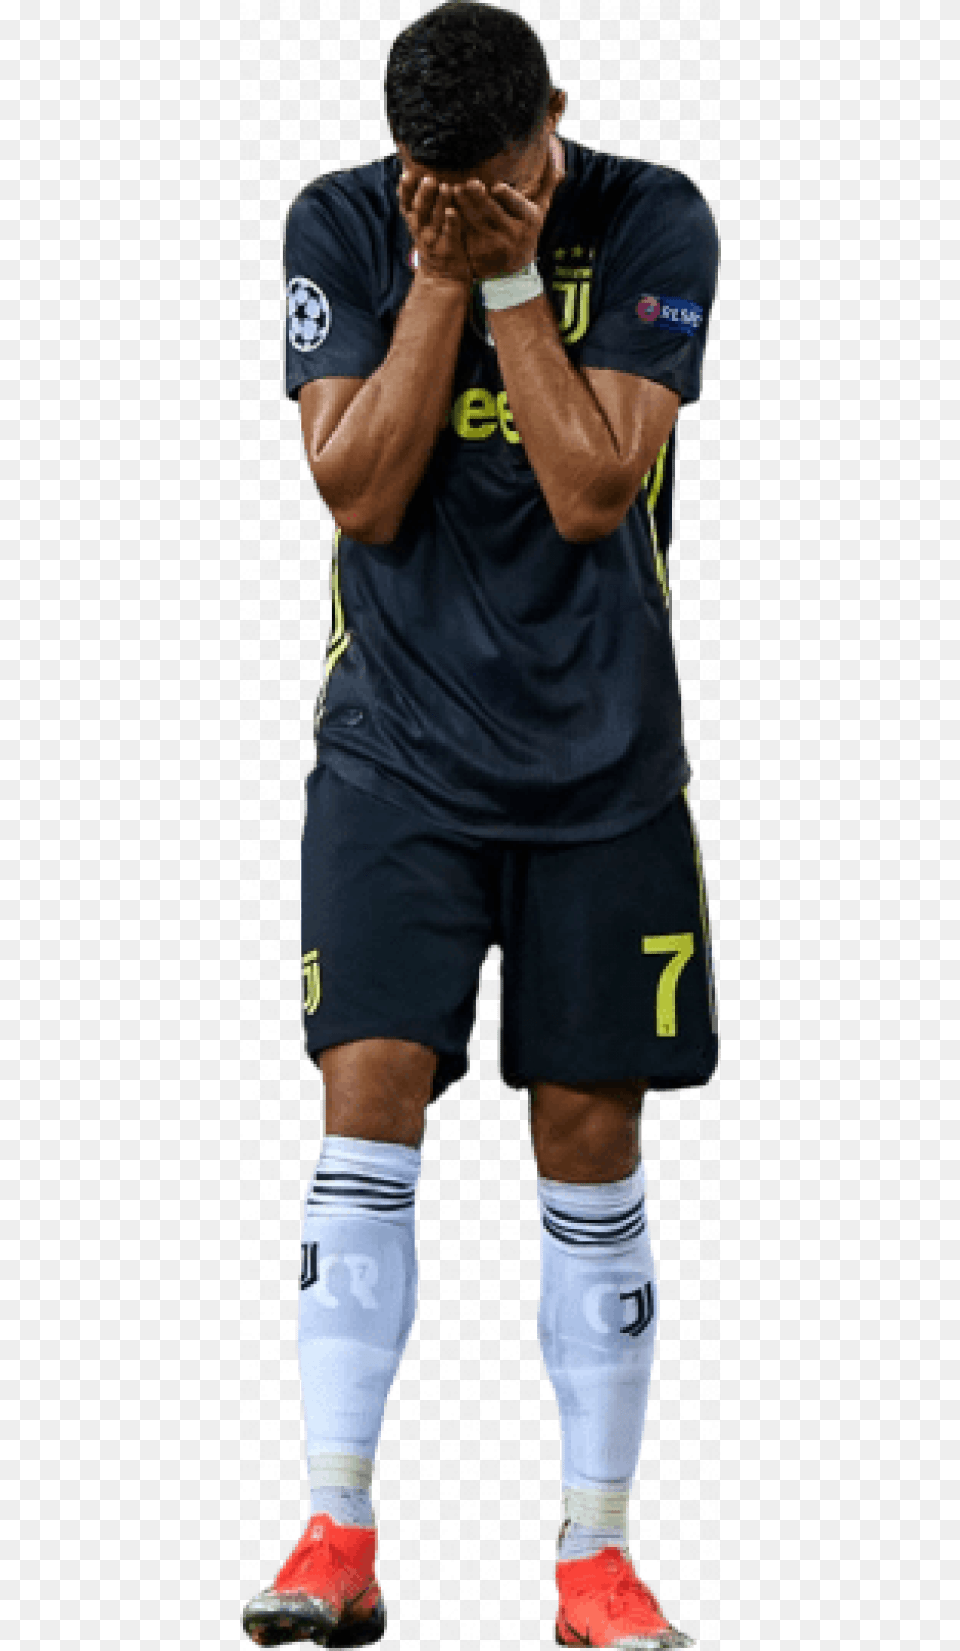 Free Download Cristiano Ronaldo Images Background One Piece Garment, Shorts, Clothing, Person, Man Png Image